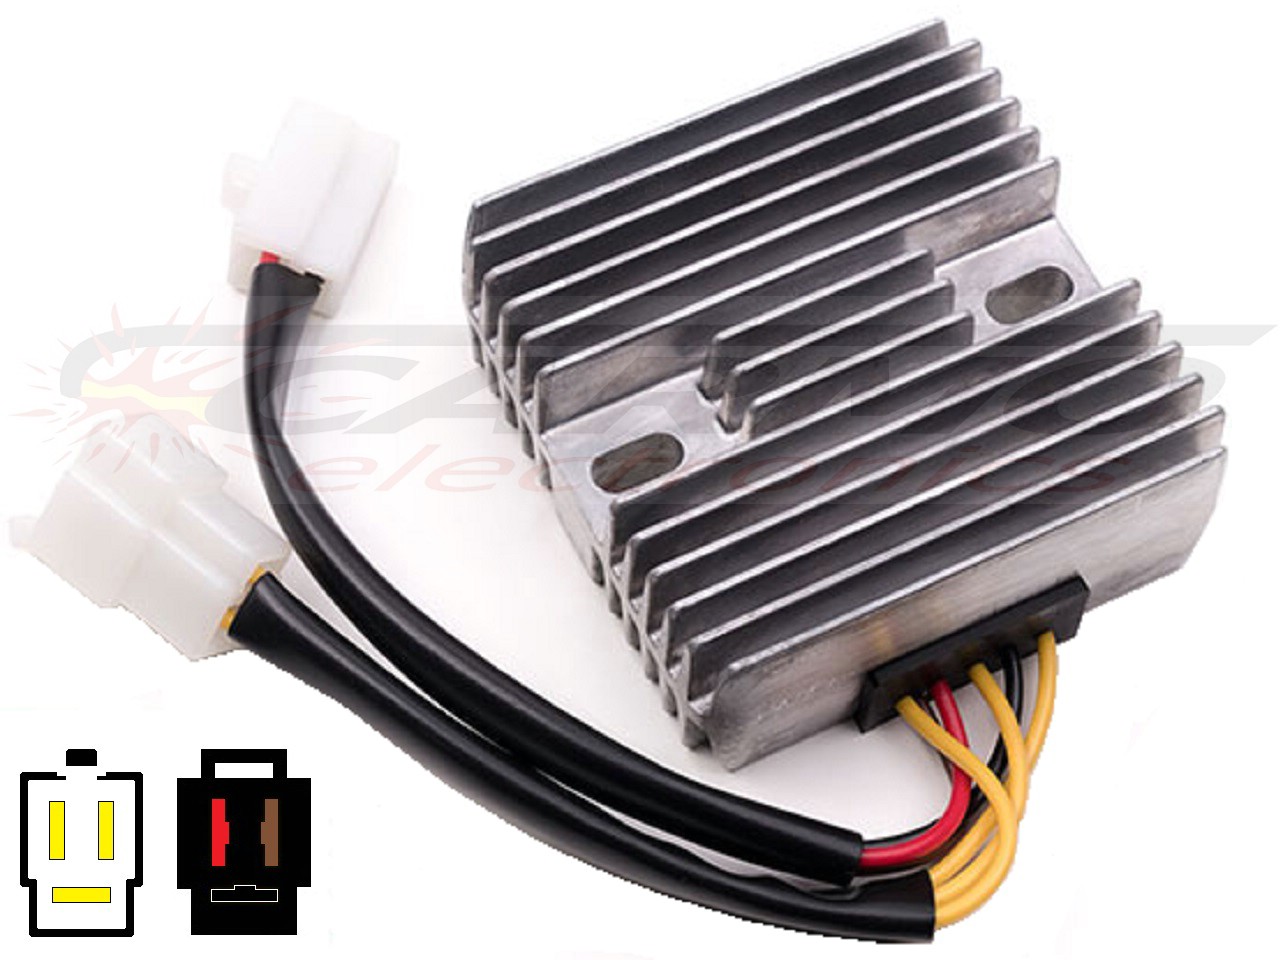 CARR731 DR250 DR350 RD125 MOSFET Voltage regulator rectifier - Click Image to Close